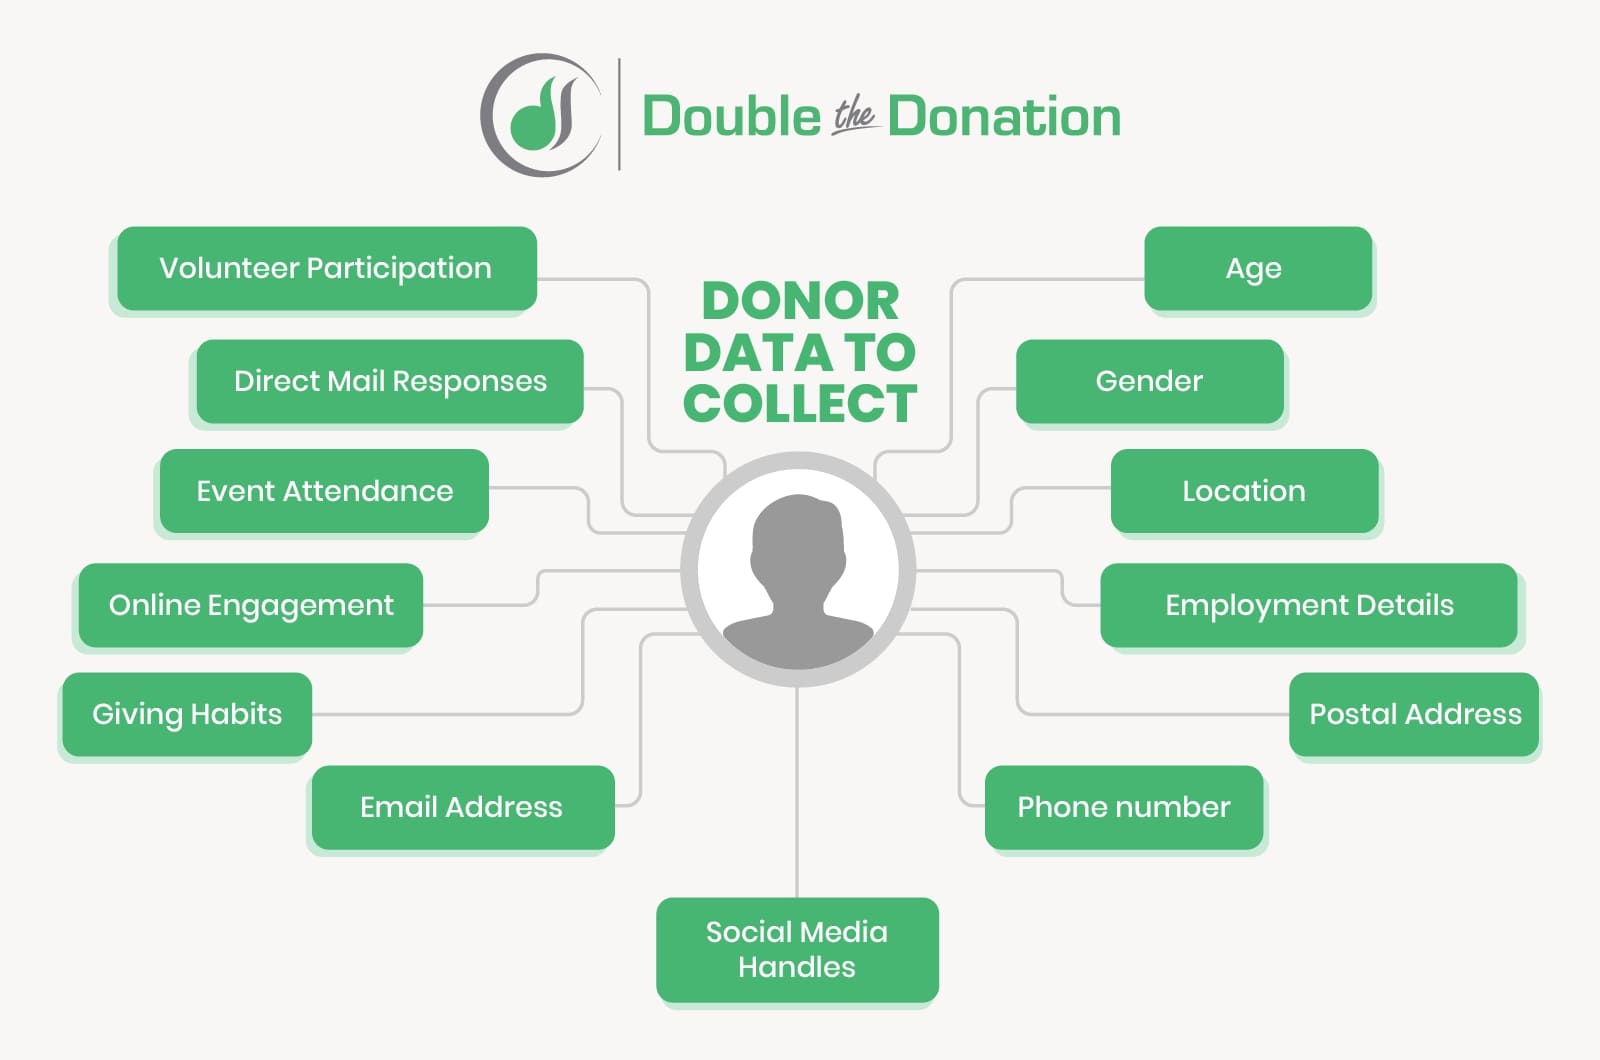 Types of donor data to collect